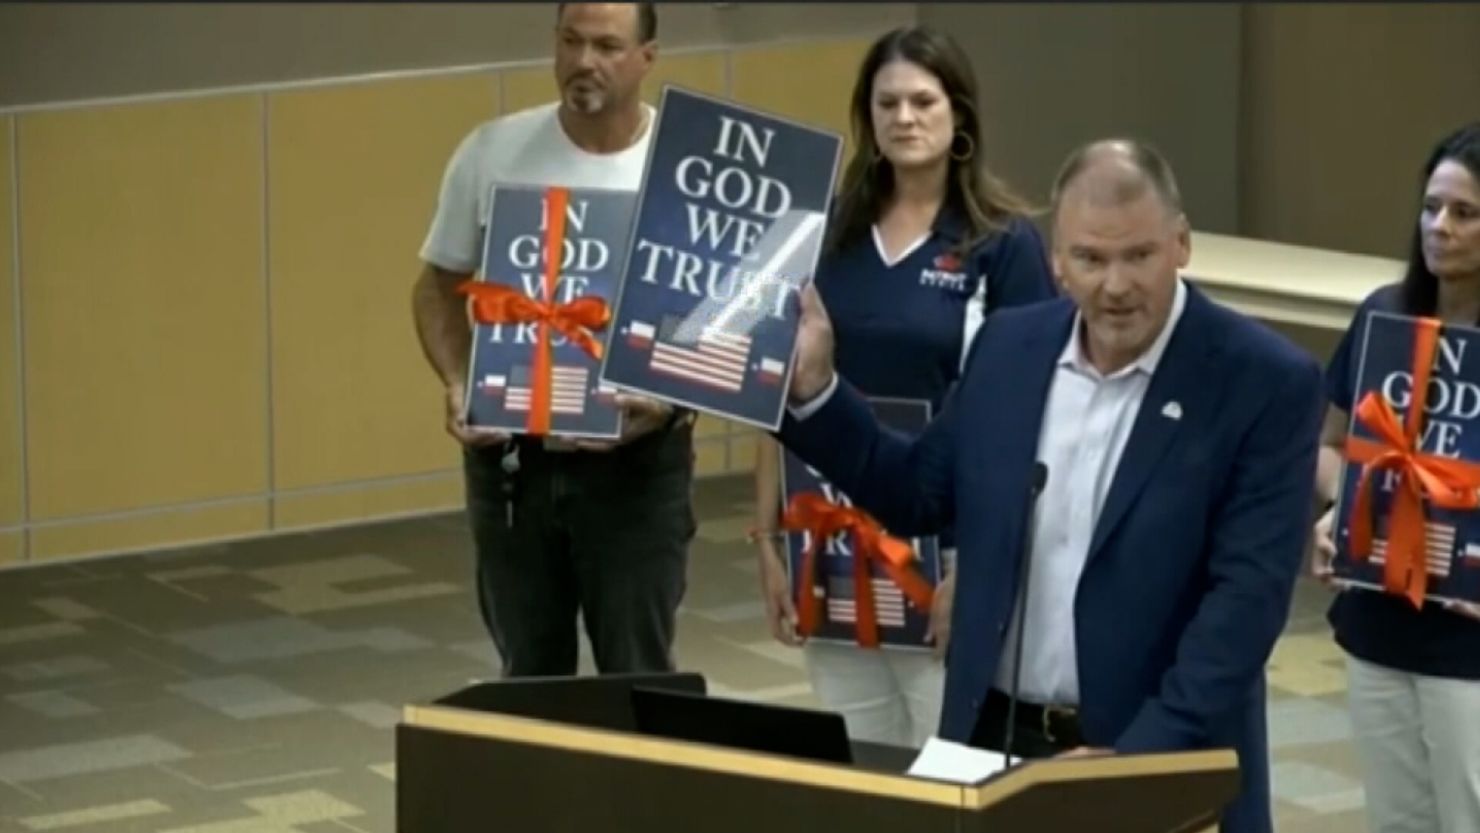 A Christian wireless provider has donated framed posters of the motto "In God We Trust," seen here at a meeting of suburban Dallas school district, which will be obliged by a new state law to display them.
